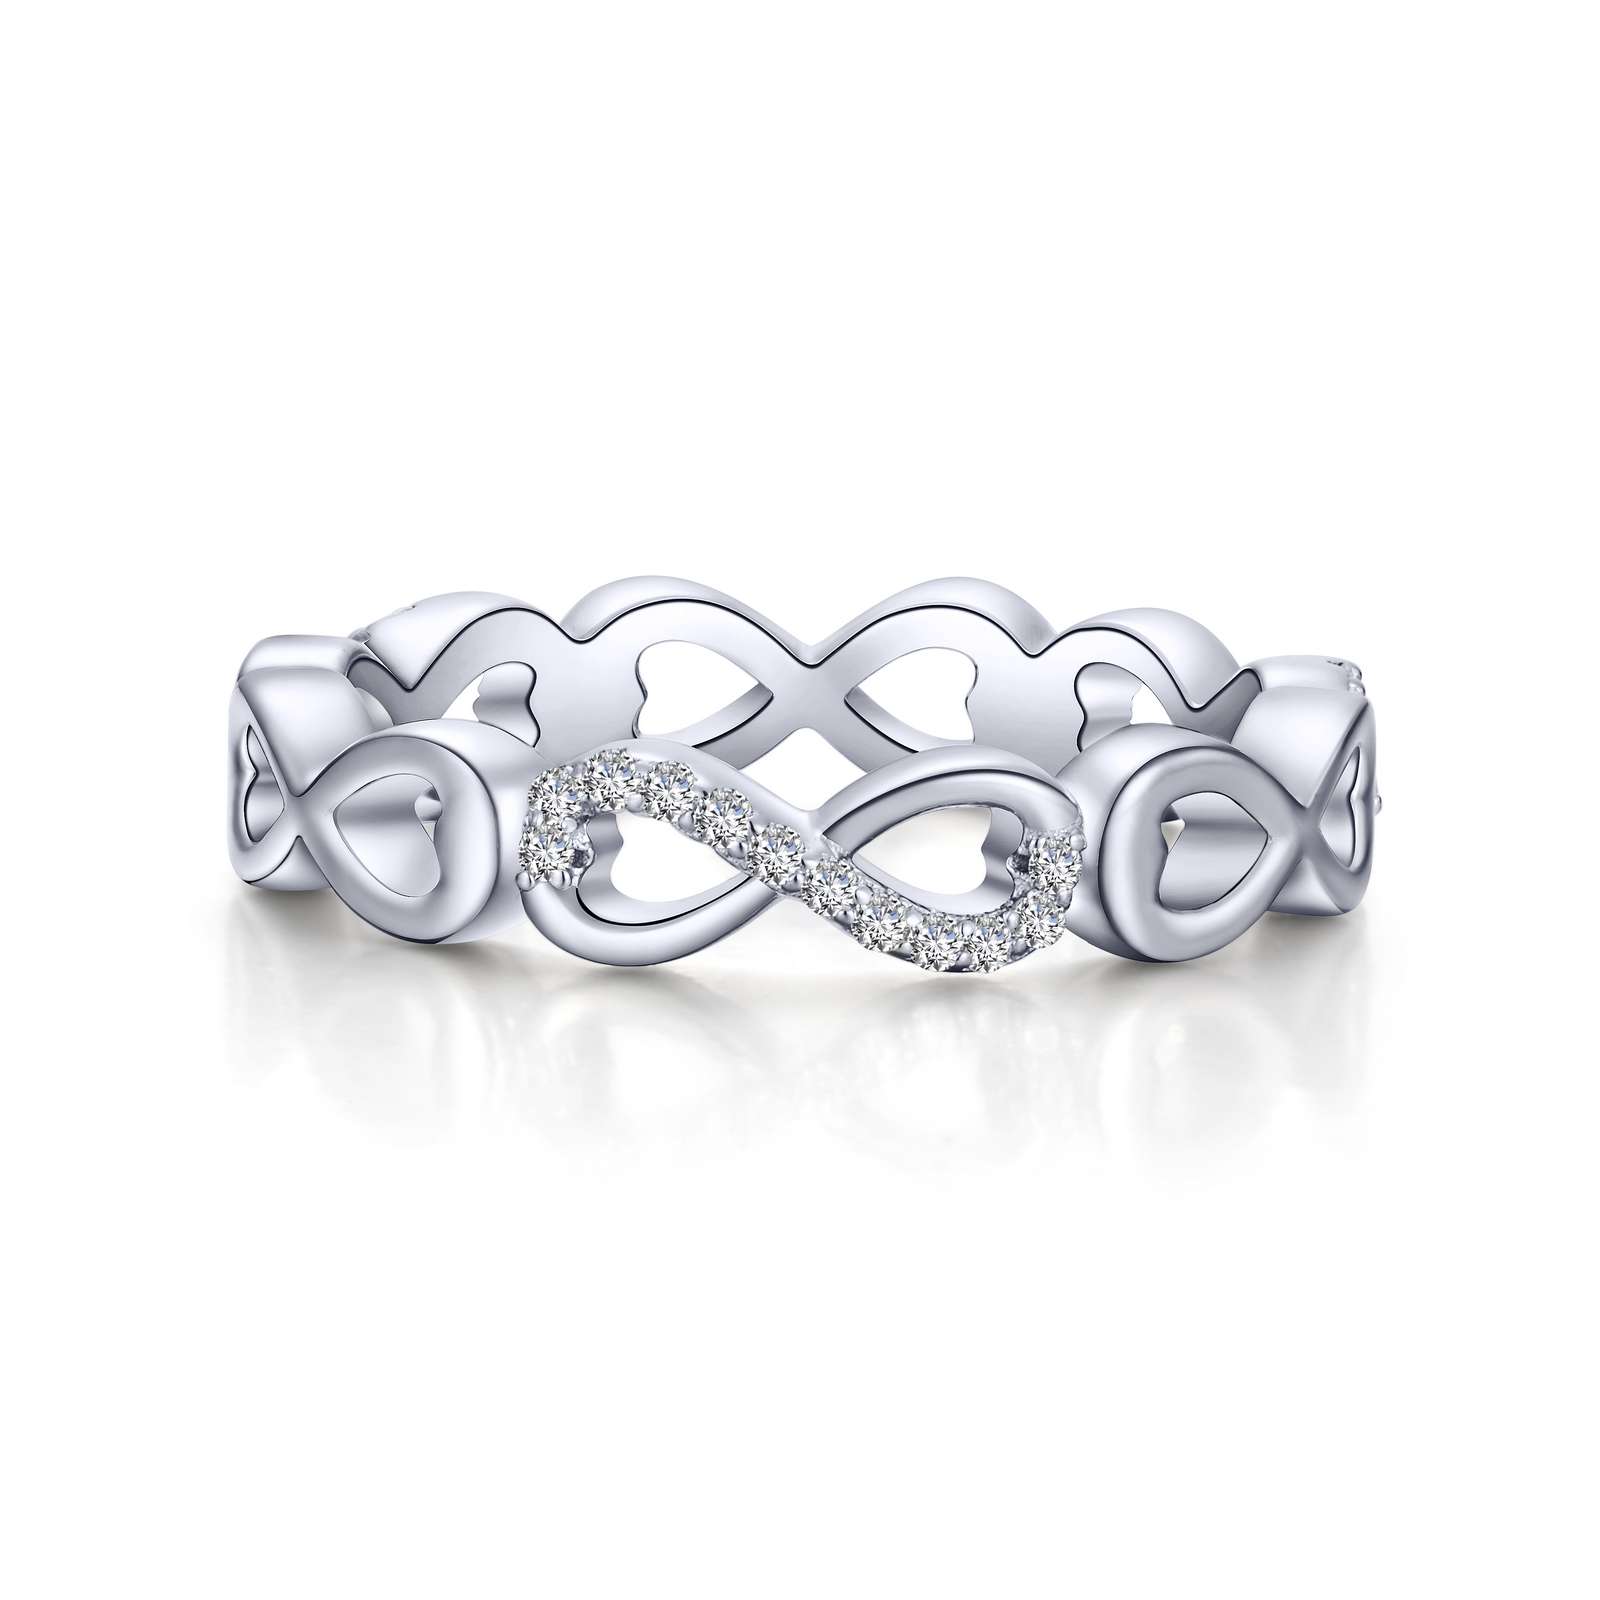 Infinity Eternity Band Griner Jewelry Co. Moultrie, GA